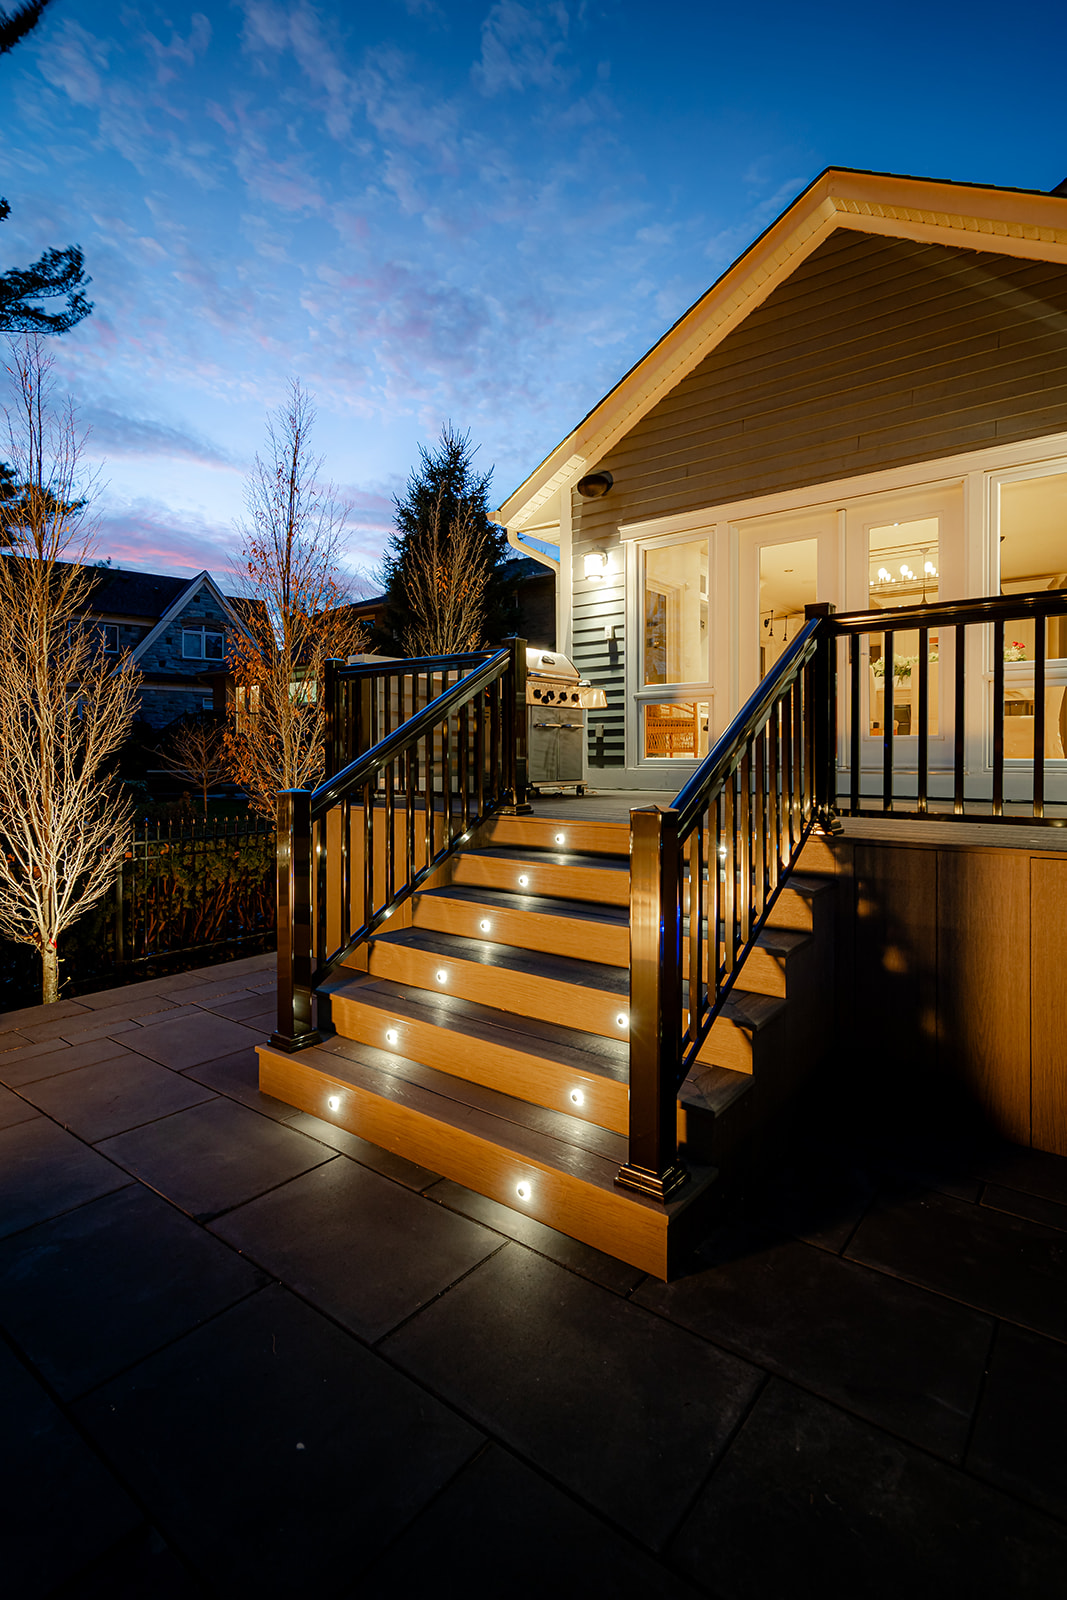 Stairs leading up toward the house with lights between the stairs.